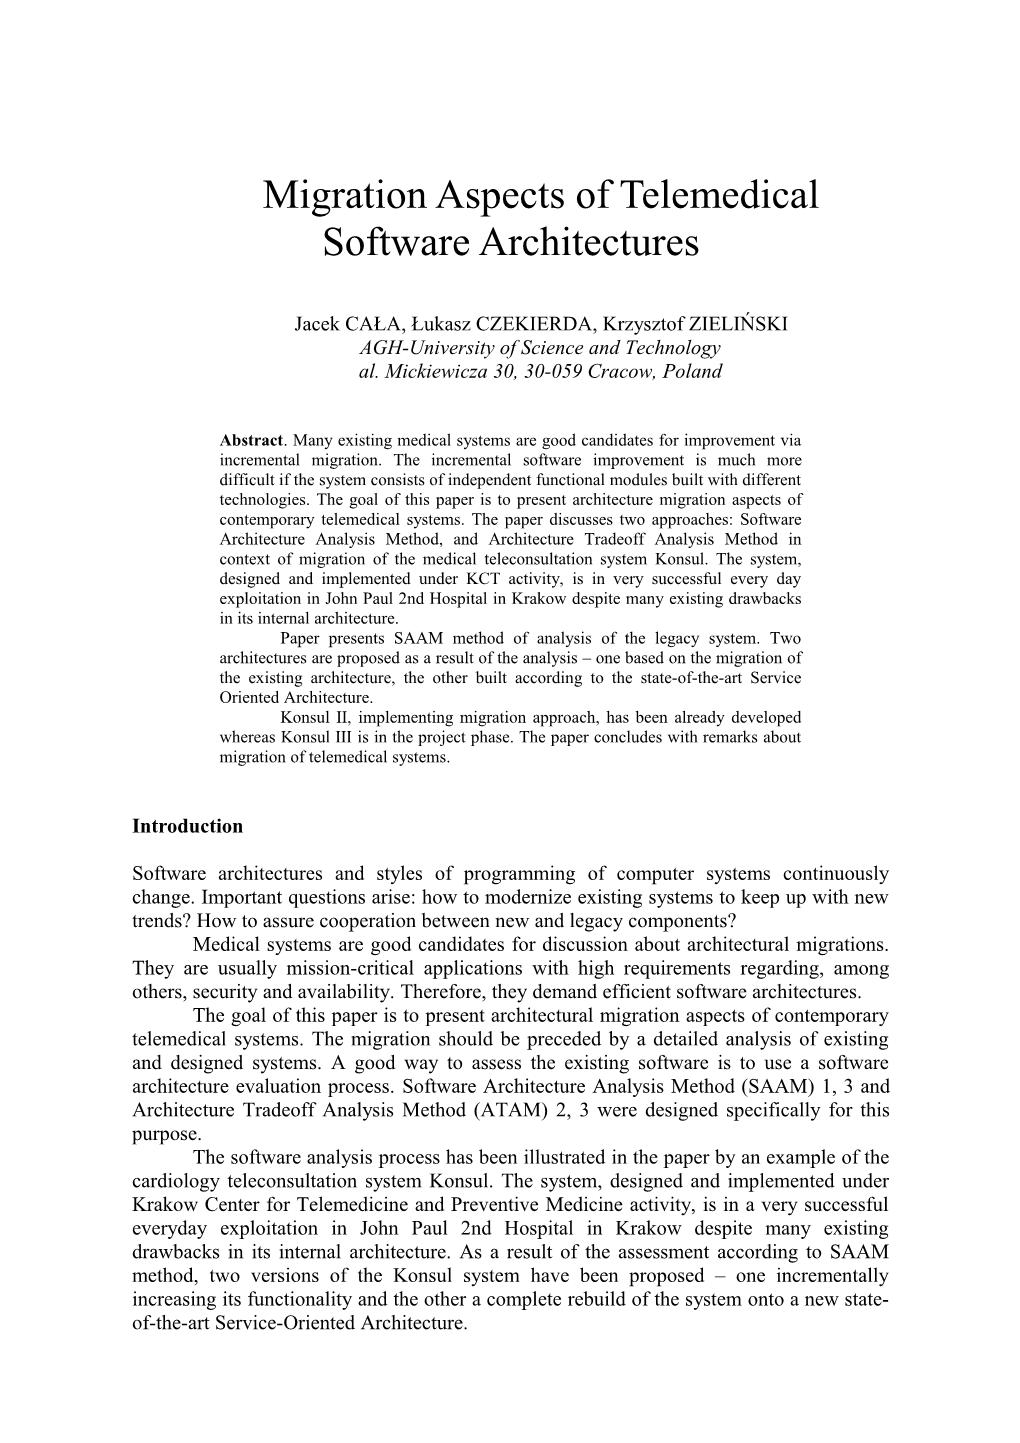 Migration Aspects of Telemedical Software Architectures